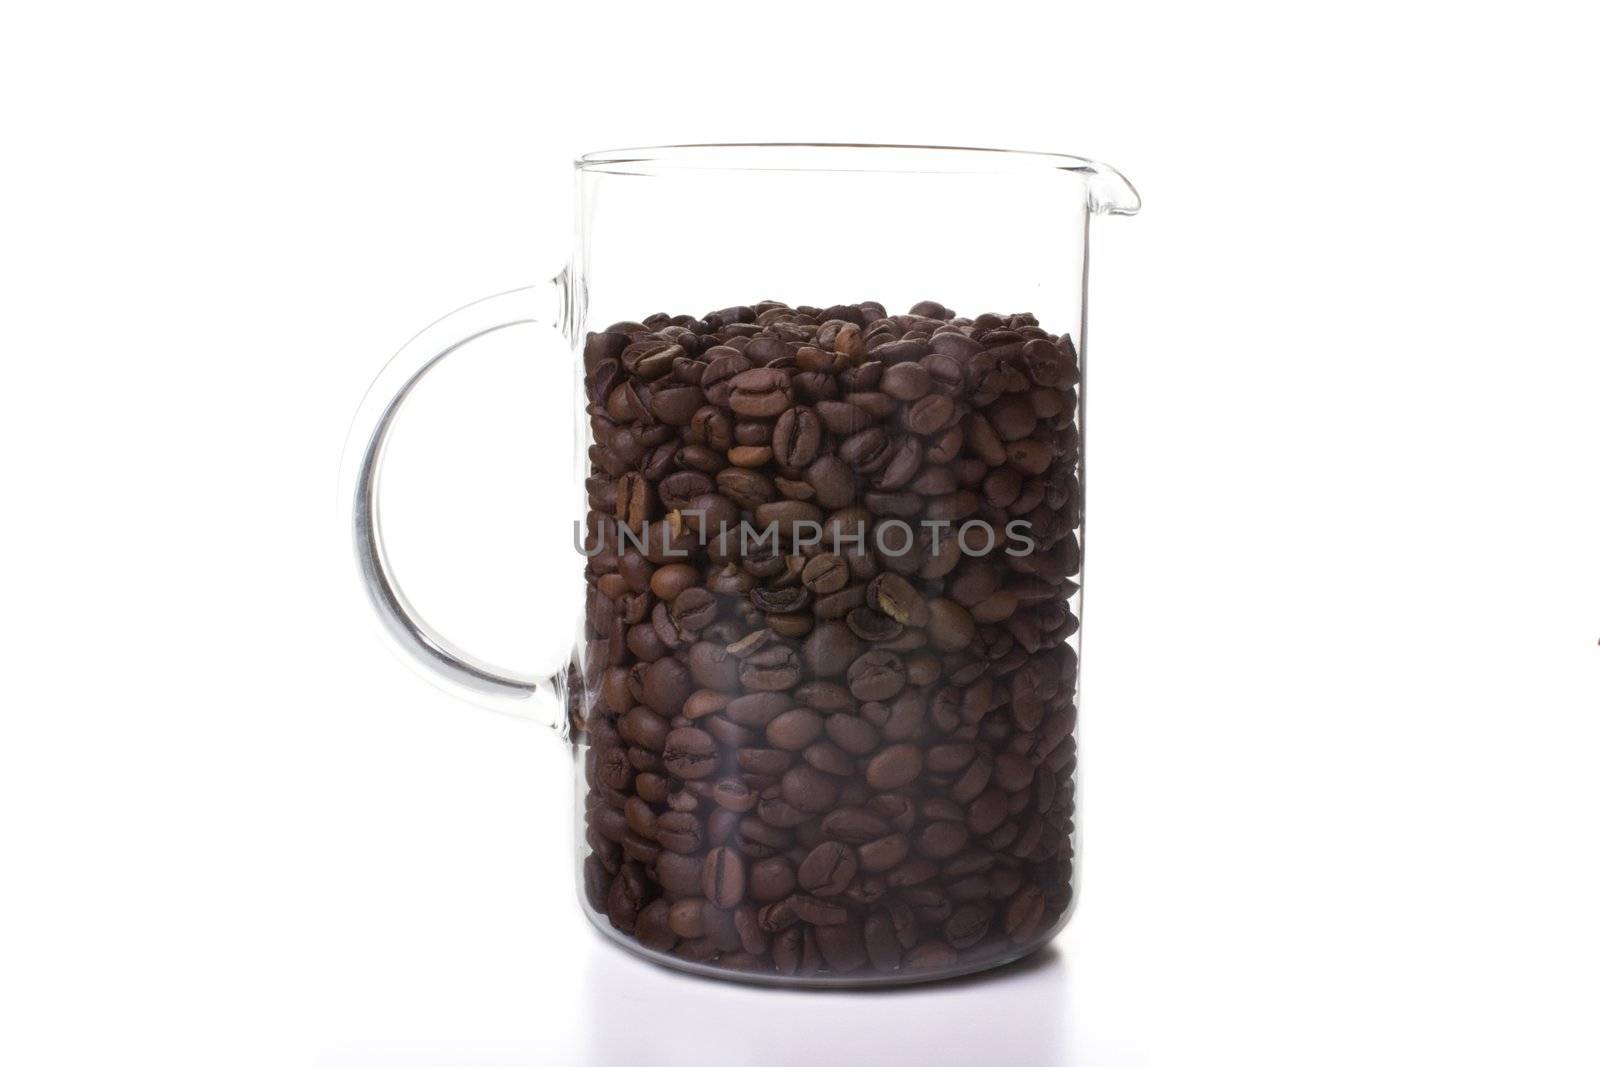 Glass pitcher of coffee beans isolate on white background.